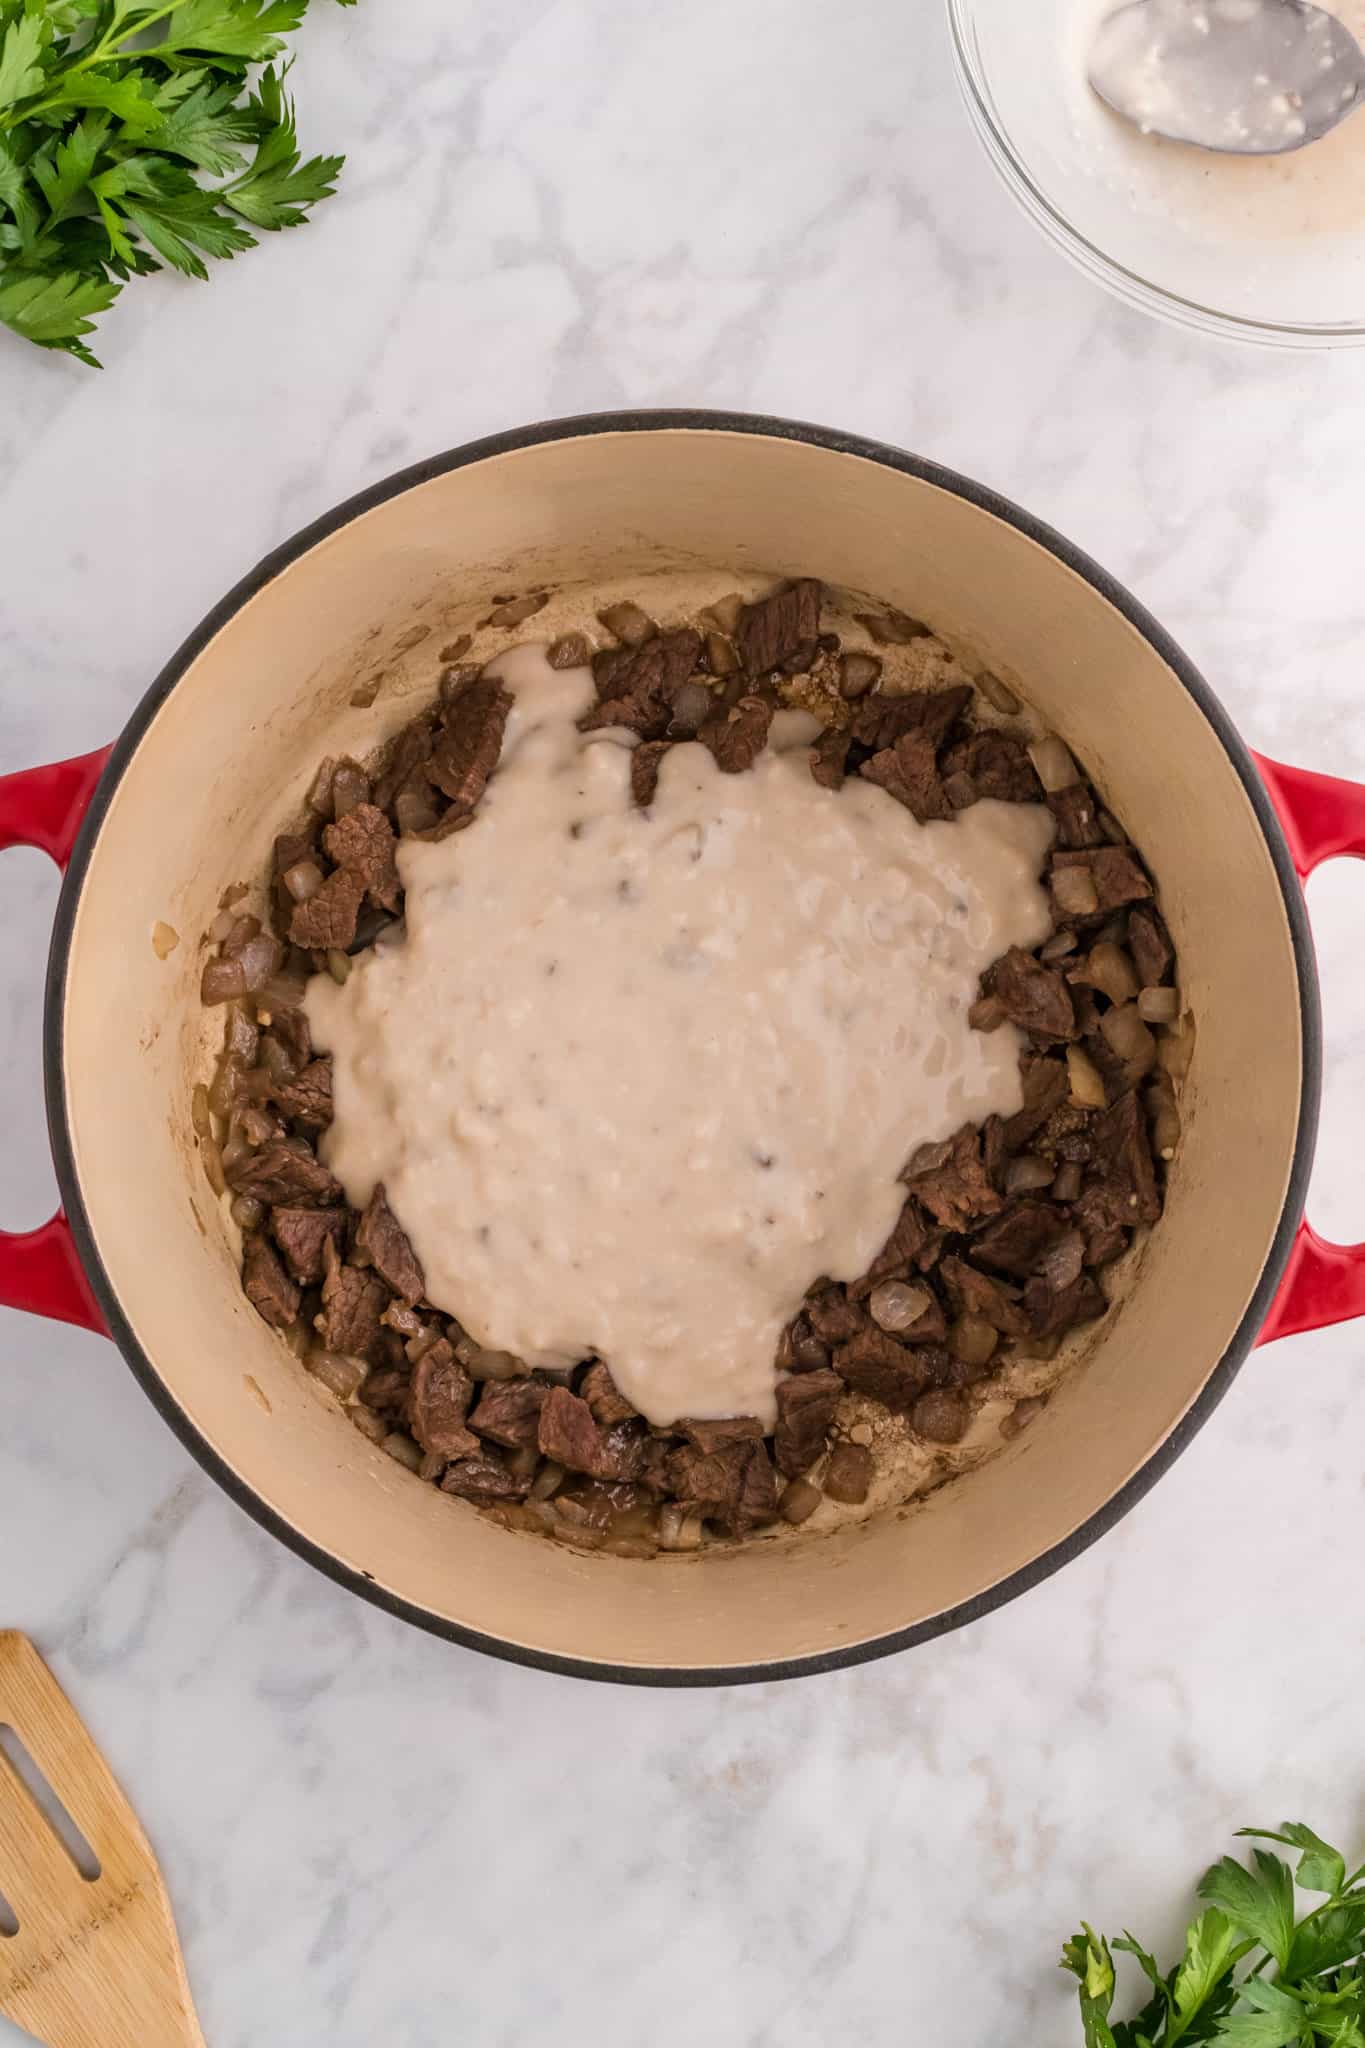 cream of mushroom soup mixture poured over steak pieces in a dutch oven